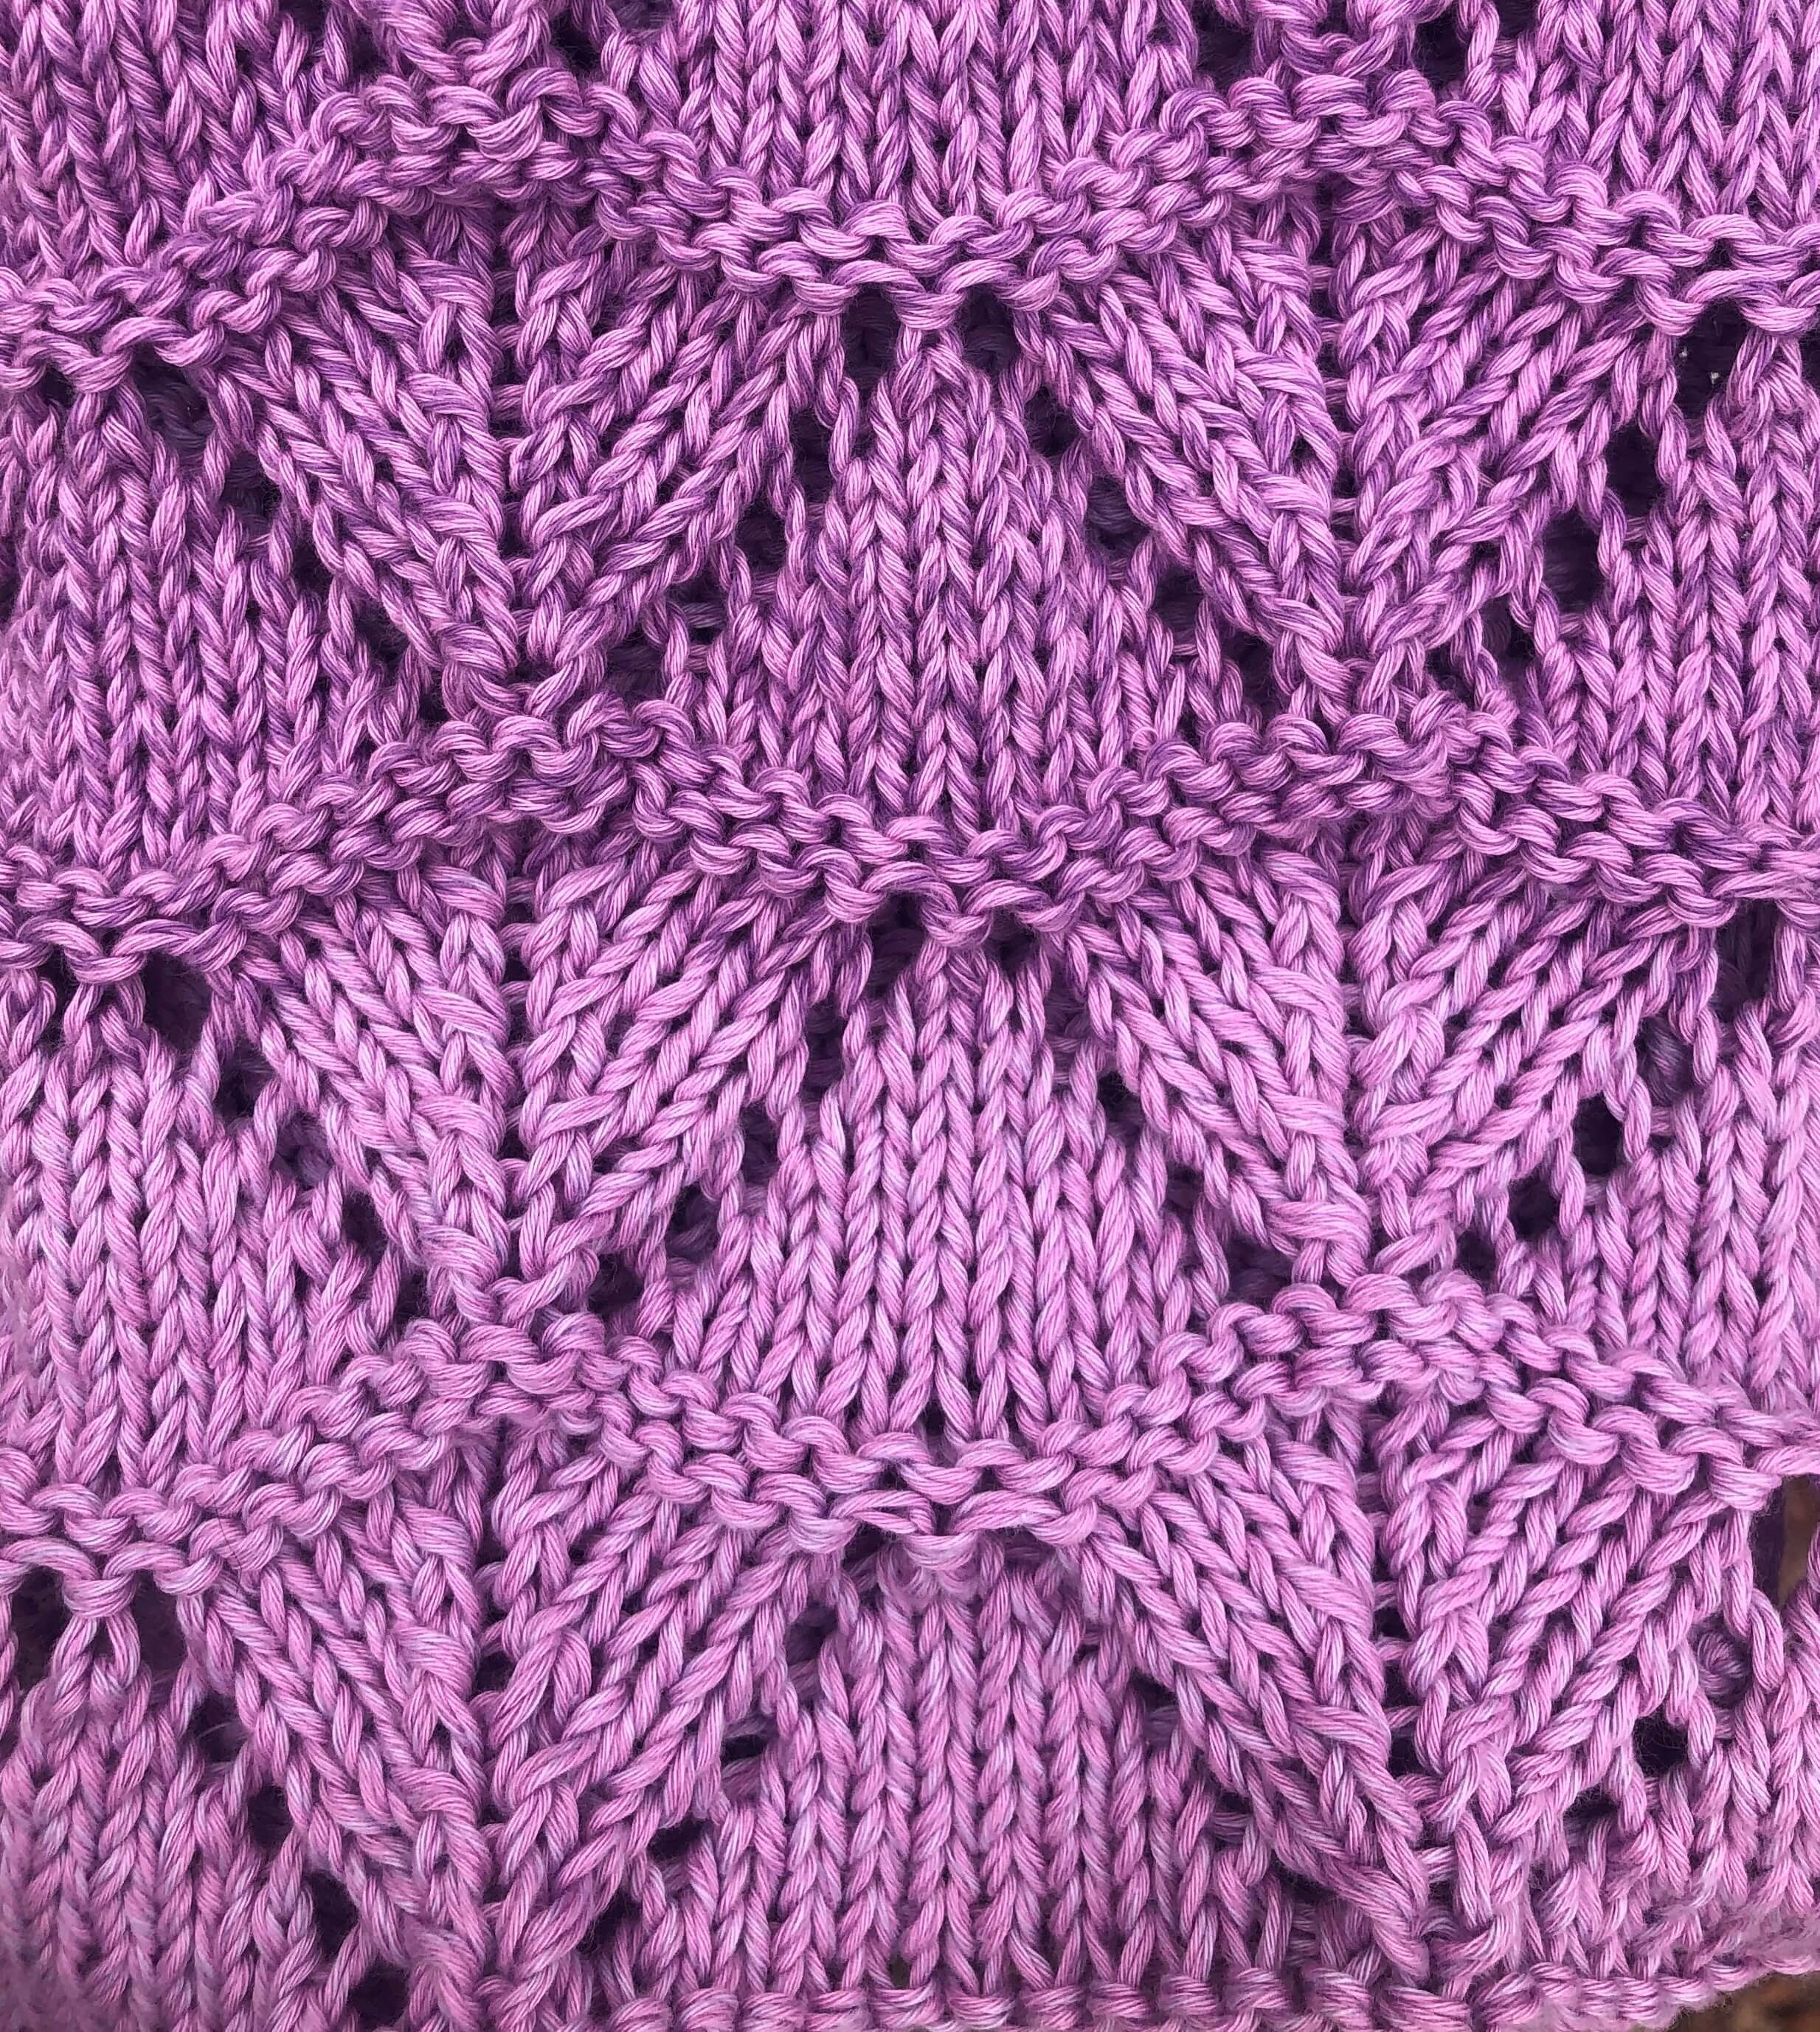 a close-up view of the textured triangles lace stitch pattern